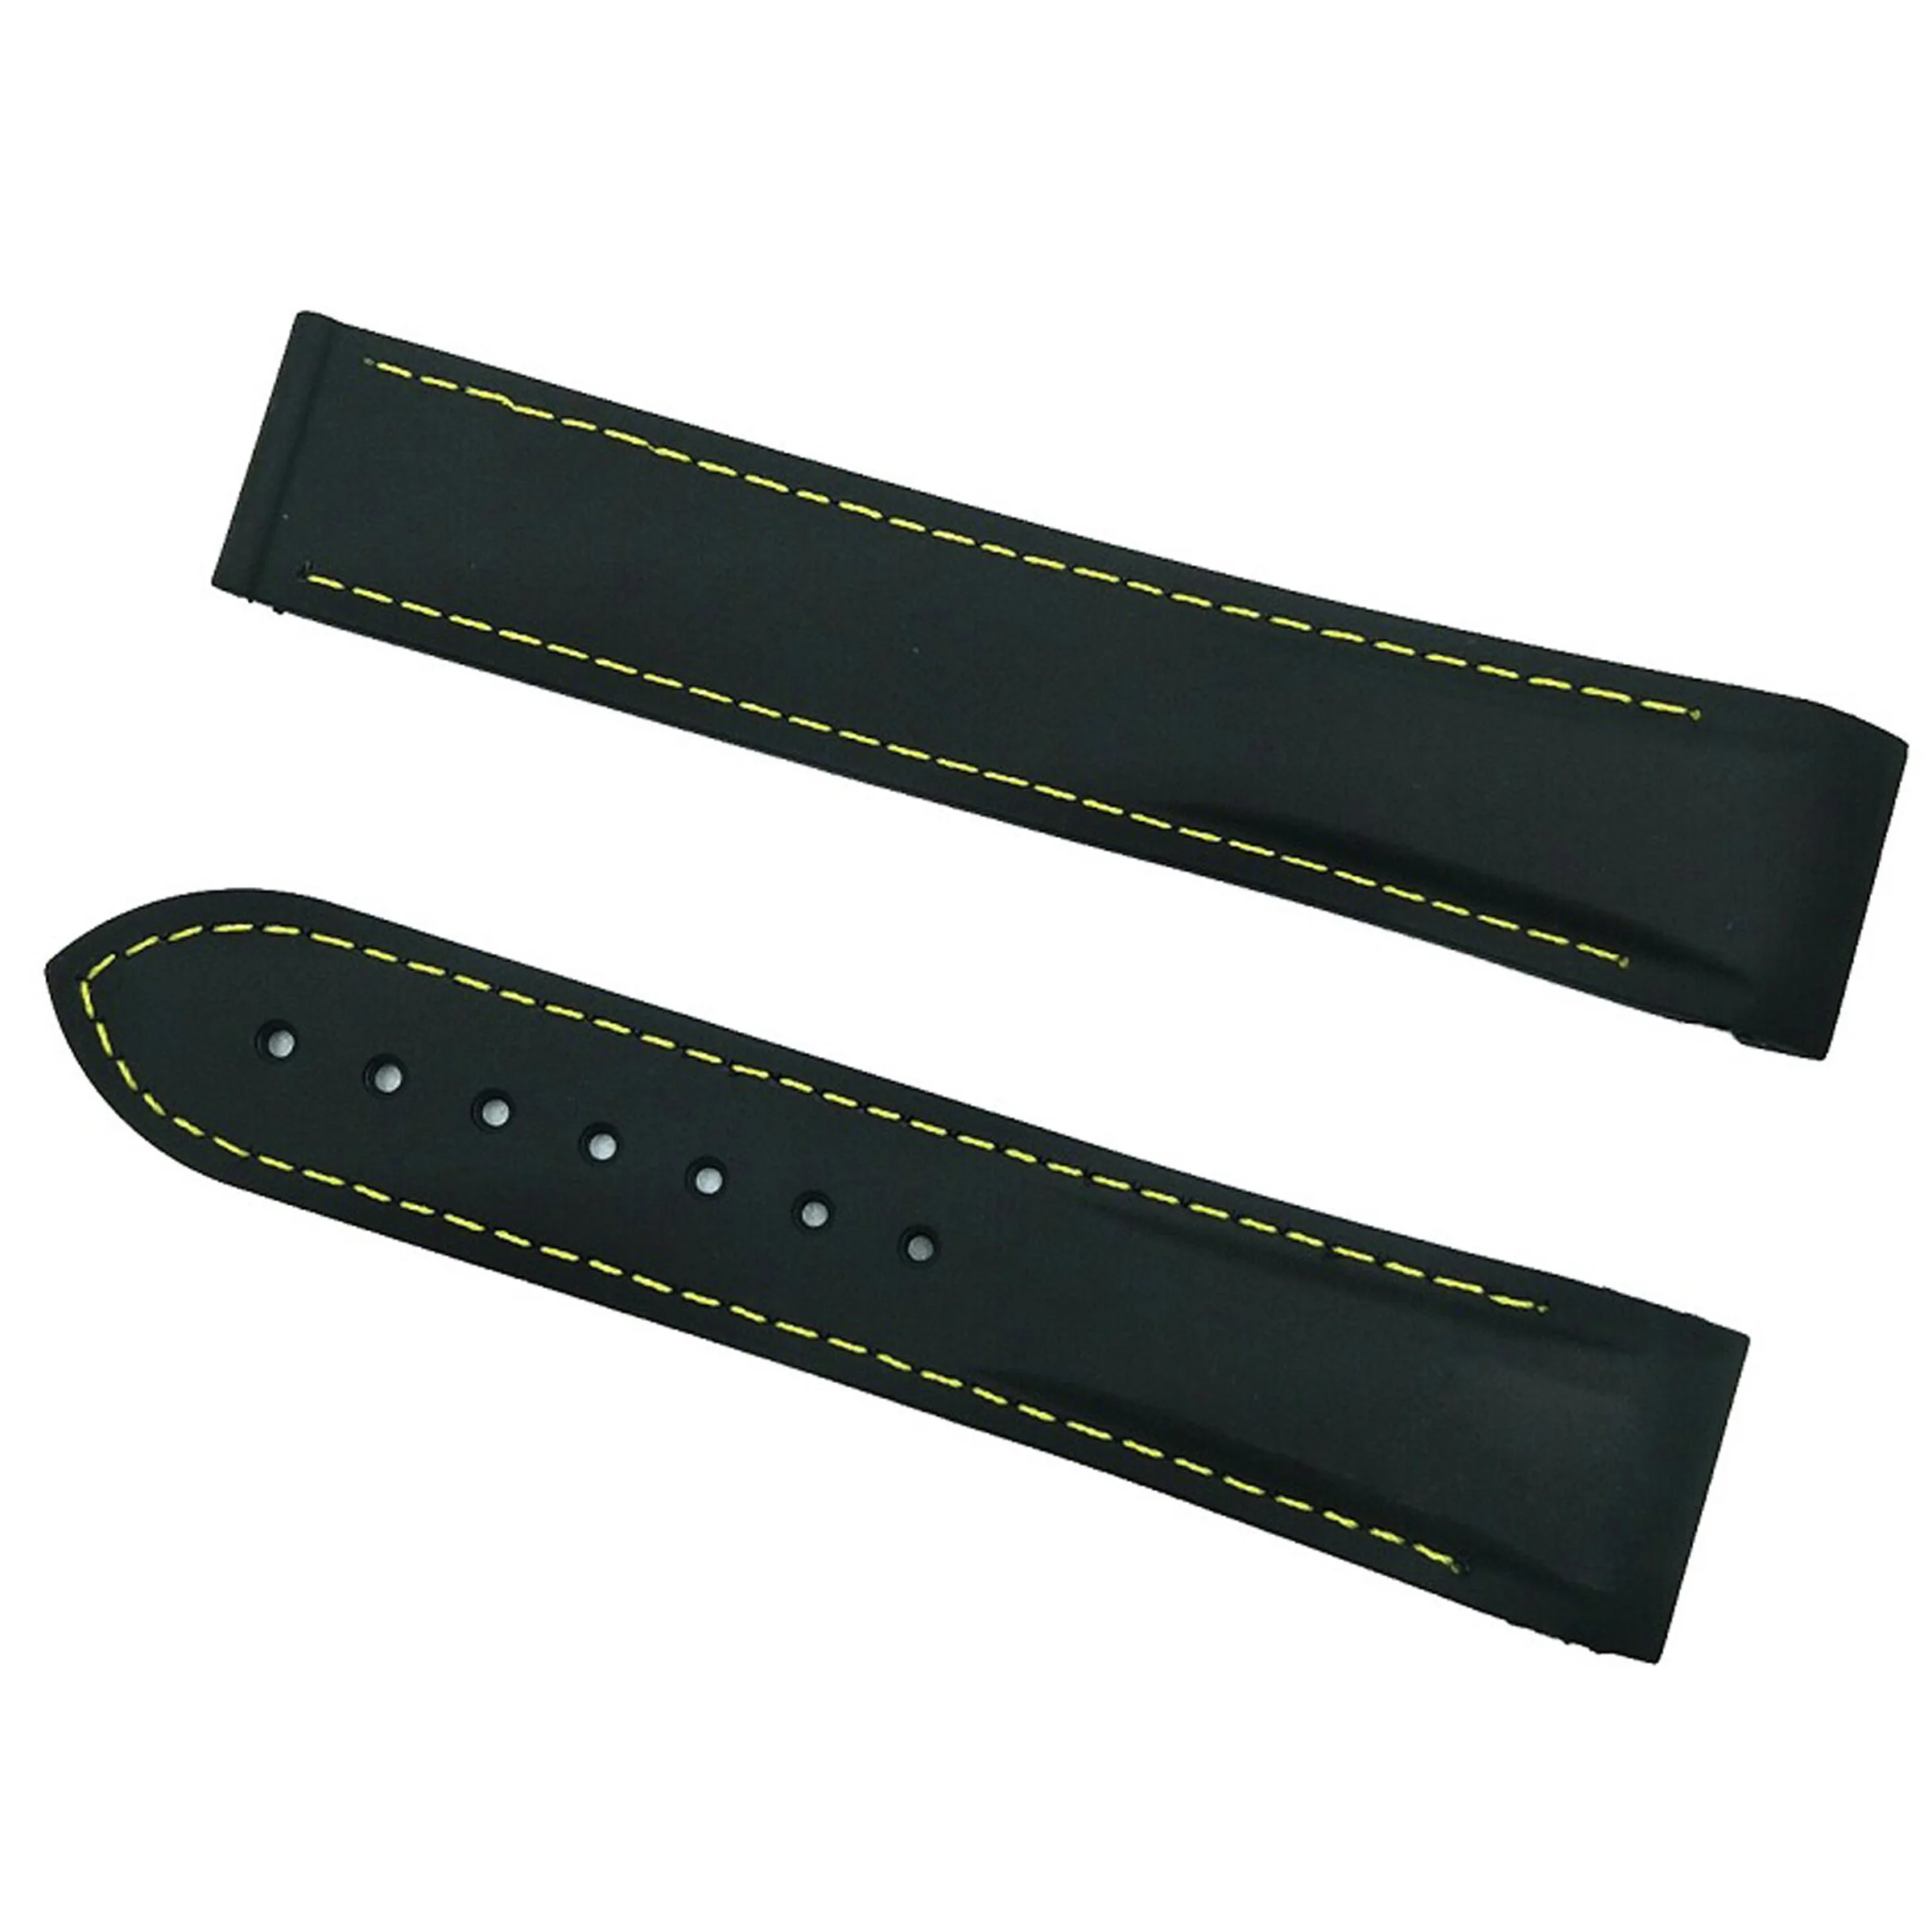 Silicone Watch Bands For Omega Seamaster Ocean Watch Band Strap High Quality Watch Bracelet Rubber Sports for Longines 20mm 22mm - Цвет ремешка: Black 3